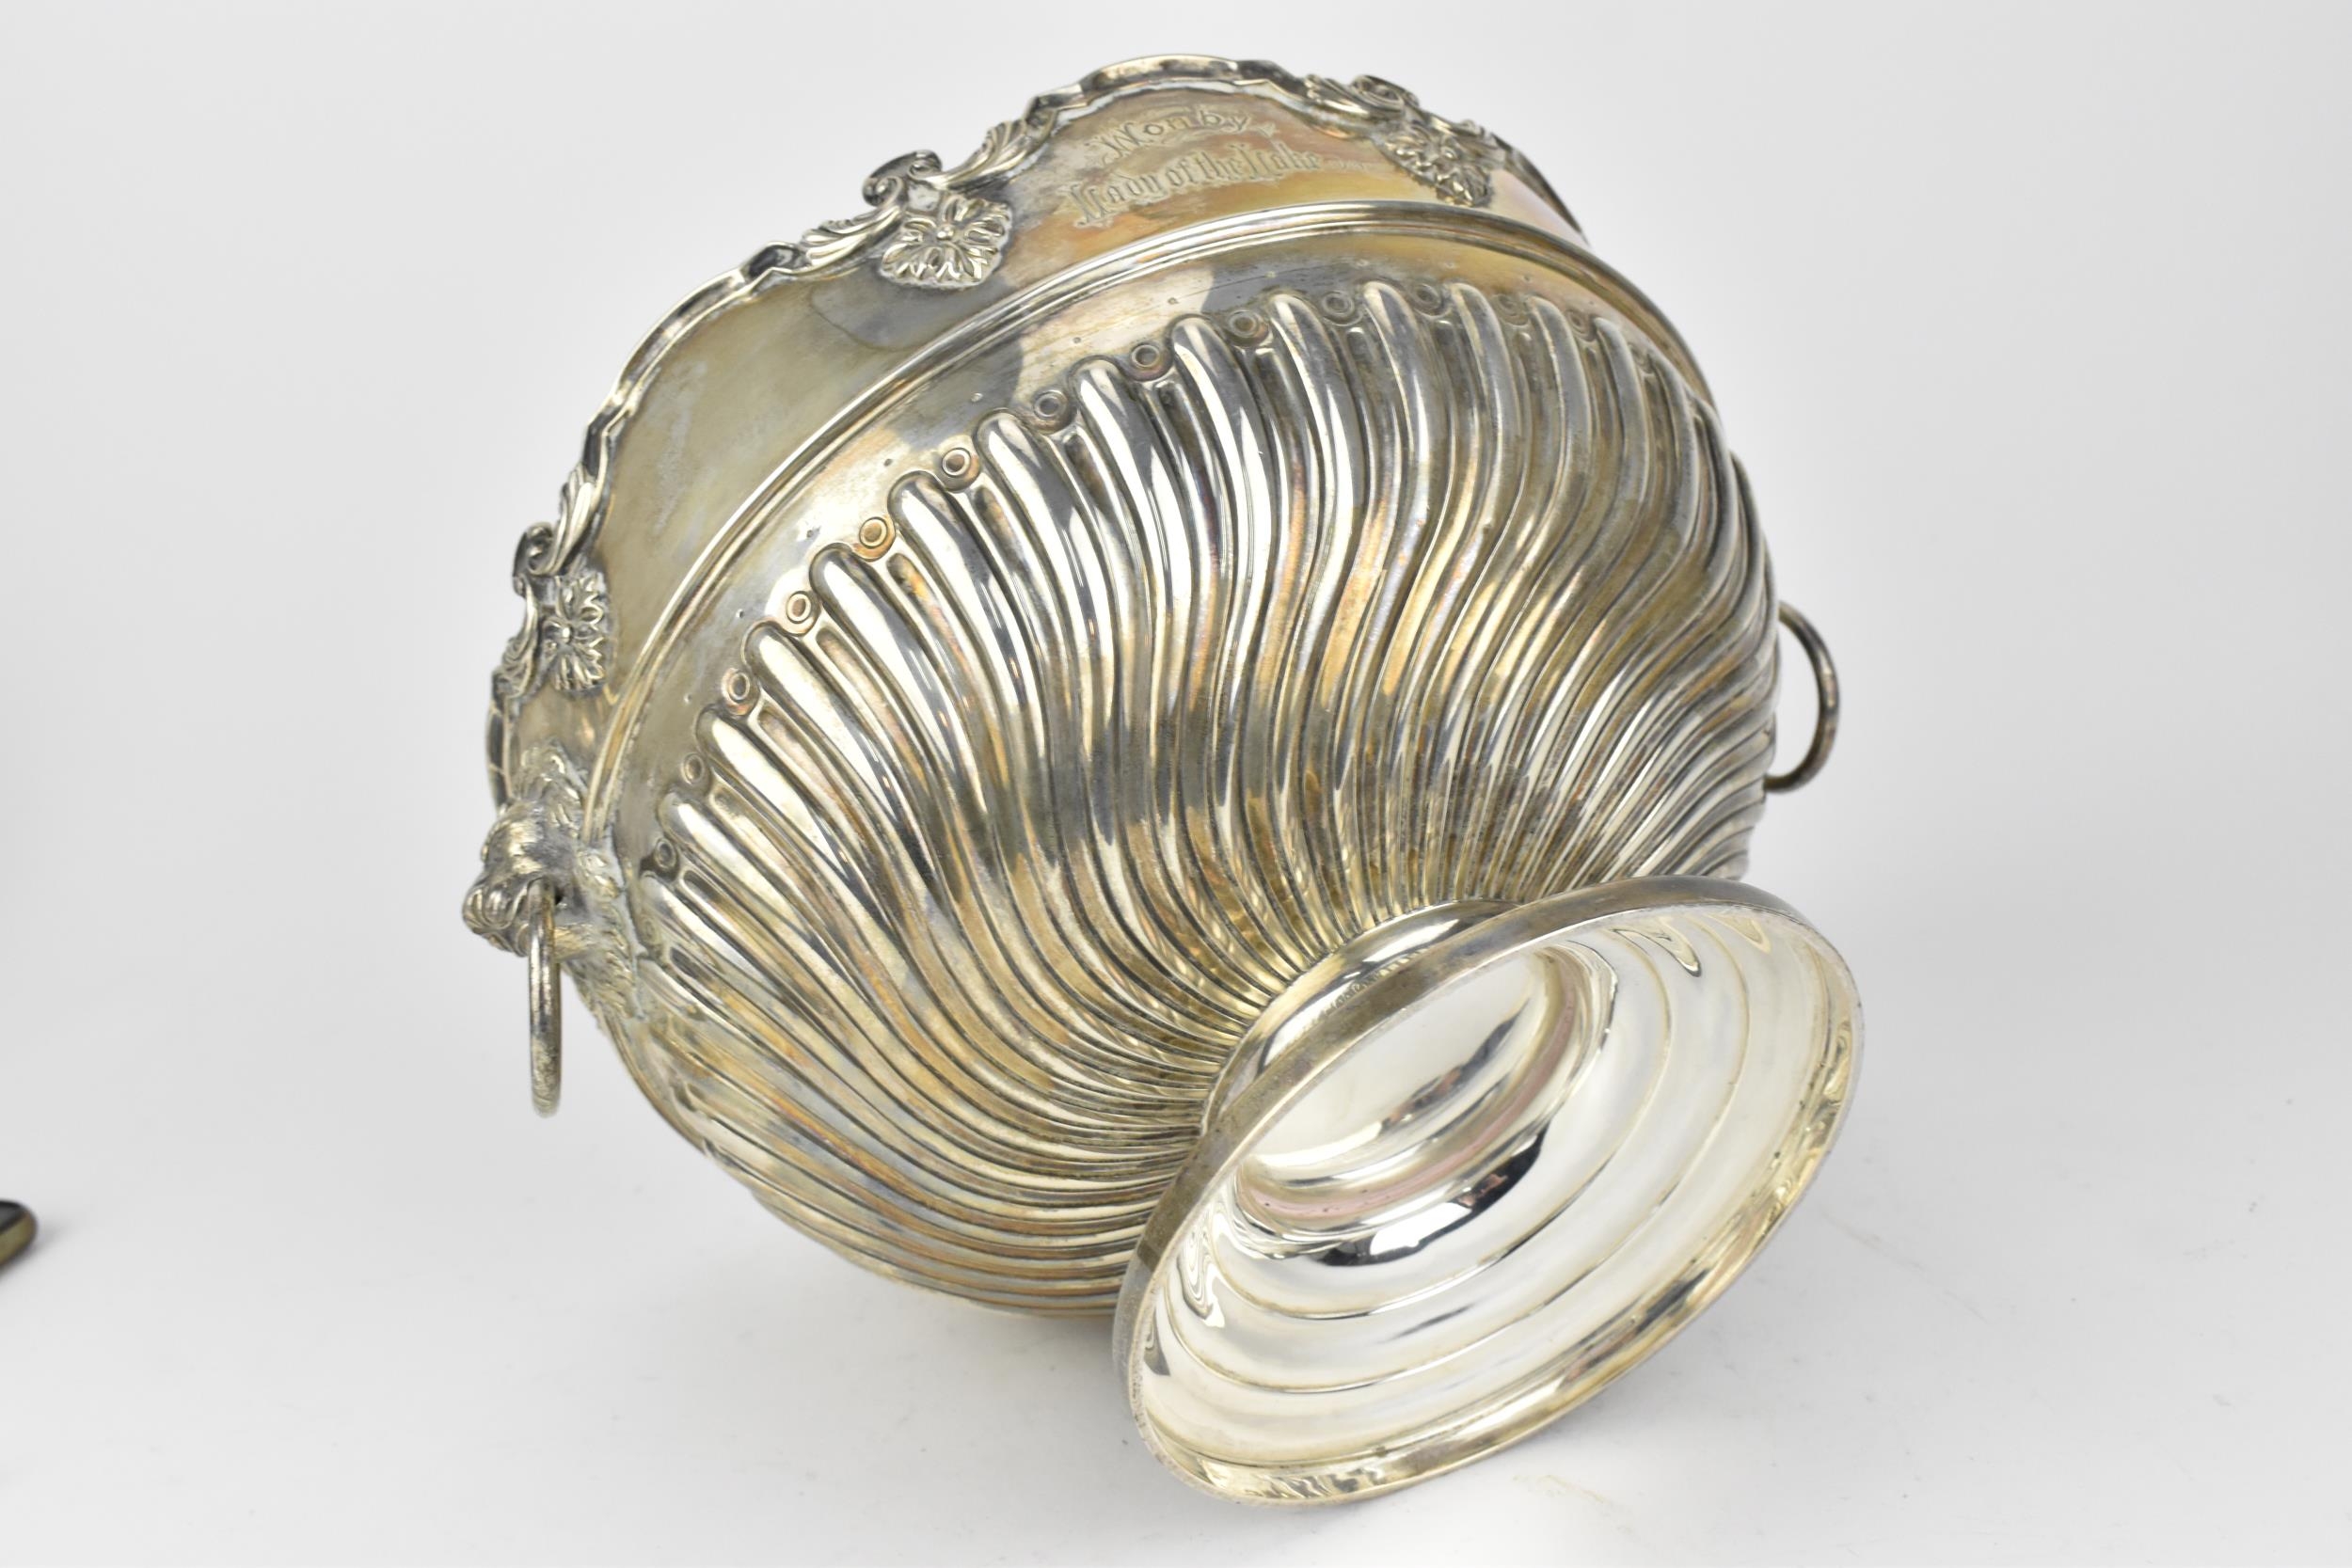 A Victorian silver presentation monteith bowl by William Hutton & Sons (Edward Hutton), London 1889, - Image 7 of 7